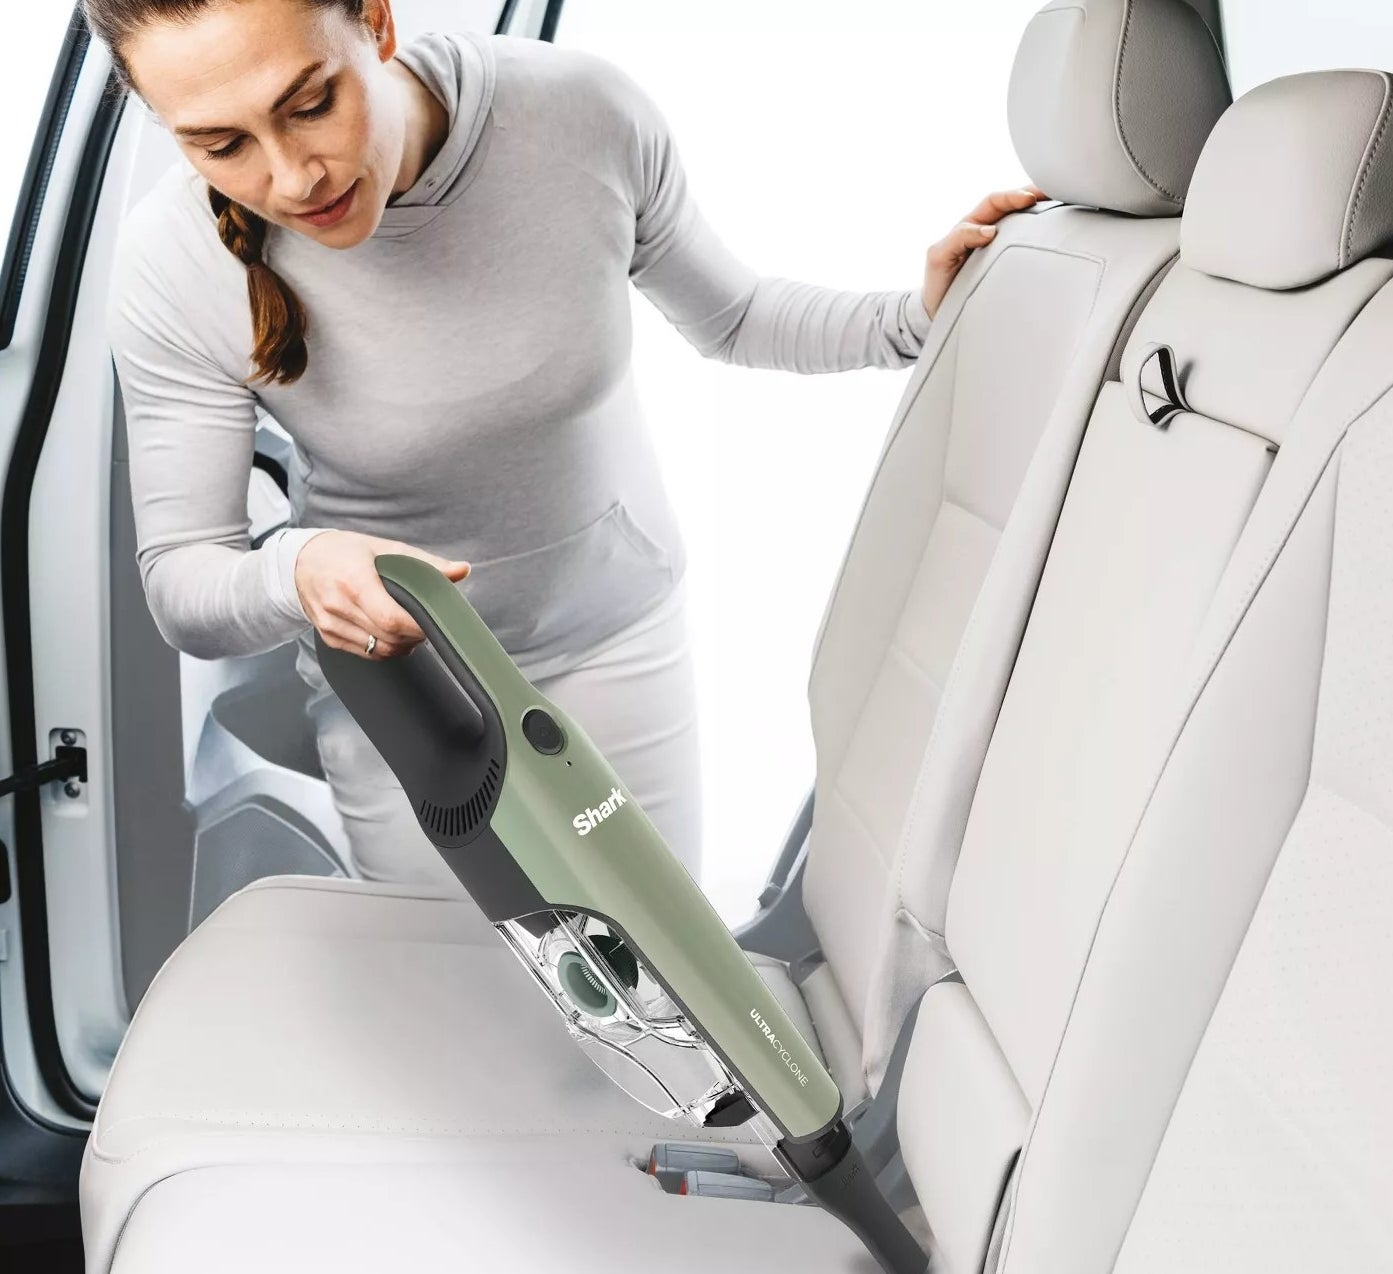 The vacuum being used on car seats